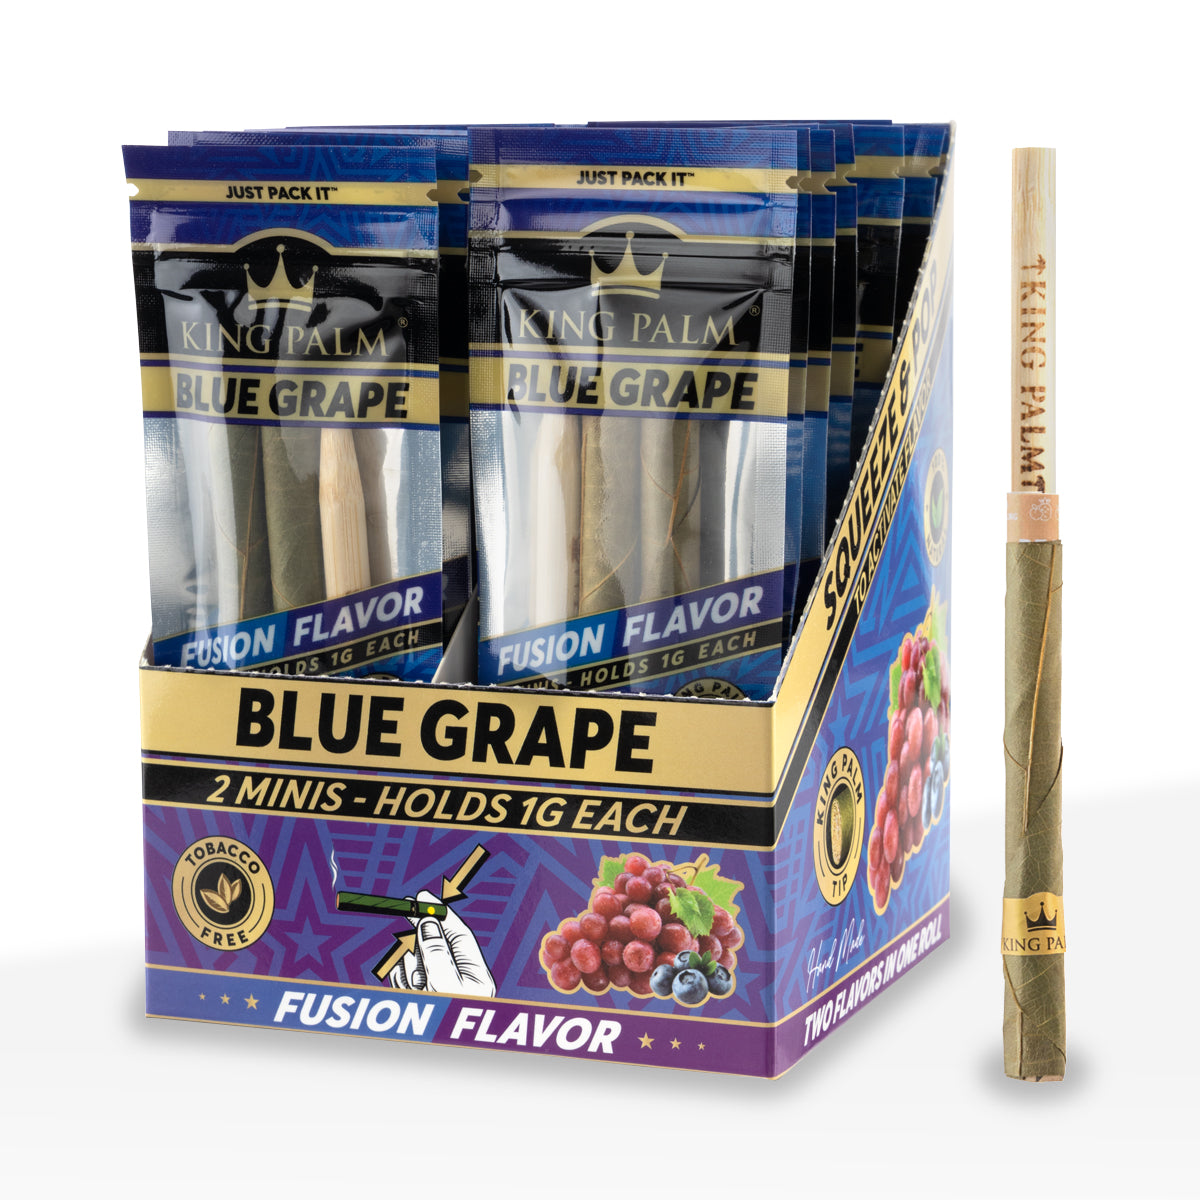 King Palm™ | 'Retail Display' Natural Leaf Minies Blunt Wraps | Blue Grape - 20 Count